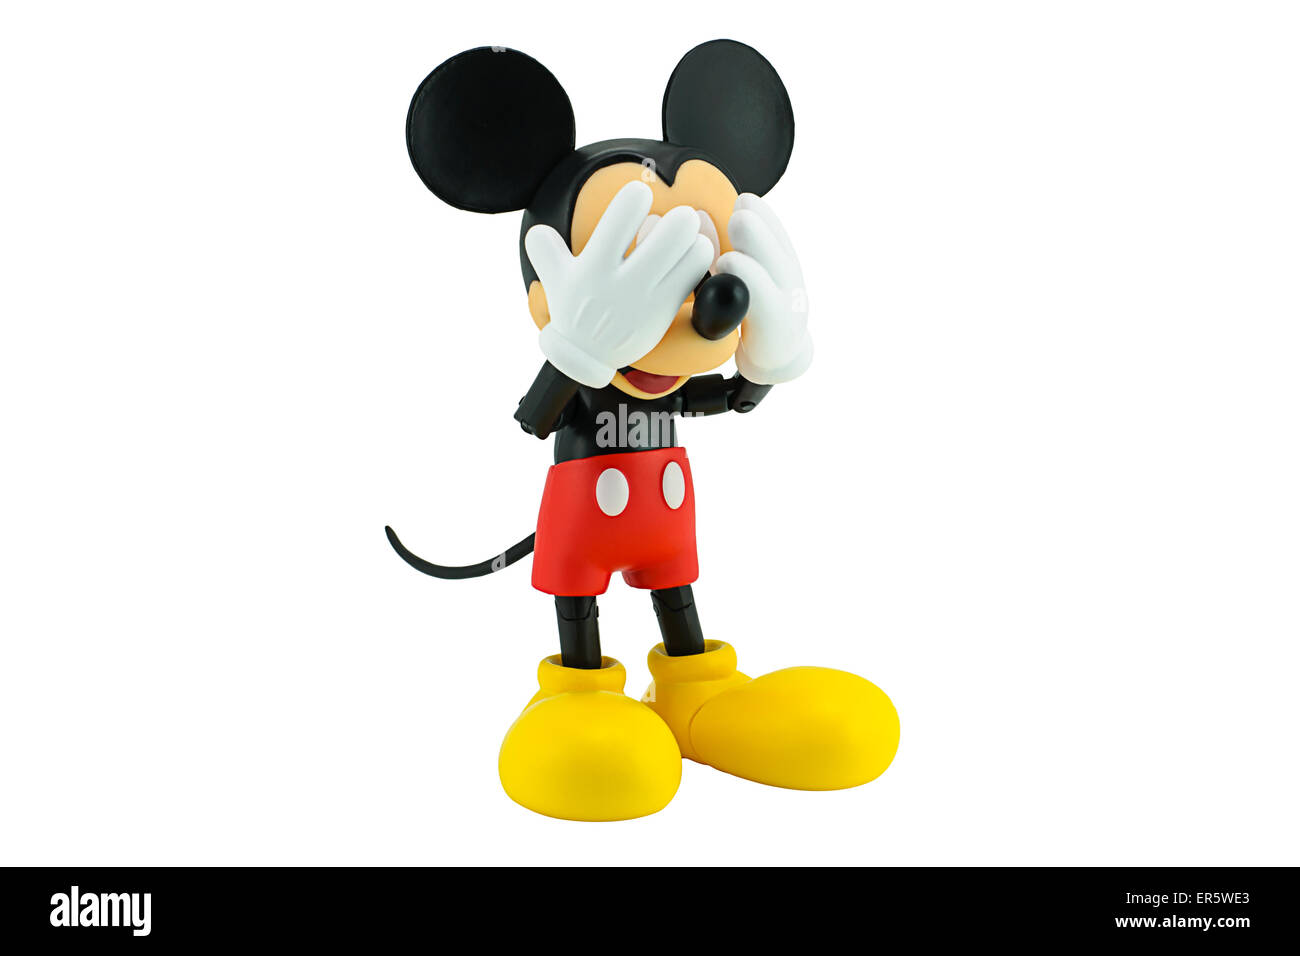 Bangkok, Thailand - January 5, 2015: Mickey Mouse action figure the official mascot of The Walt Disney Company. Mickey Mouse is Stock Photo